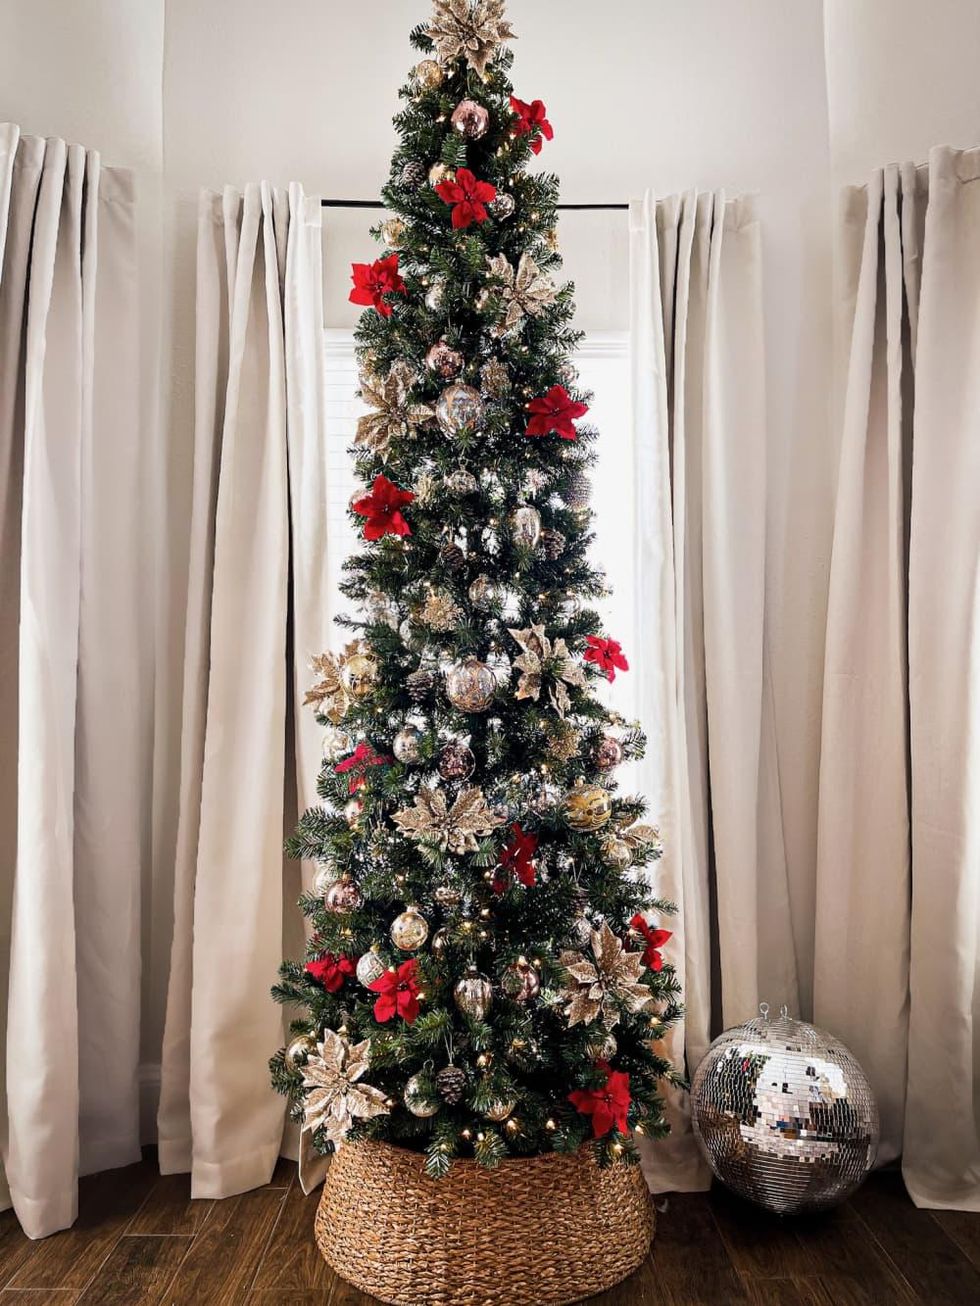 5 simple holiday decorating tips to make a Houston home merry and